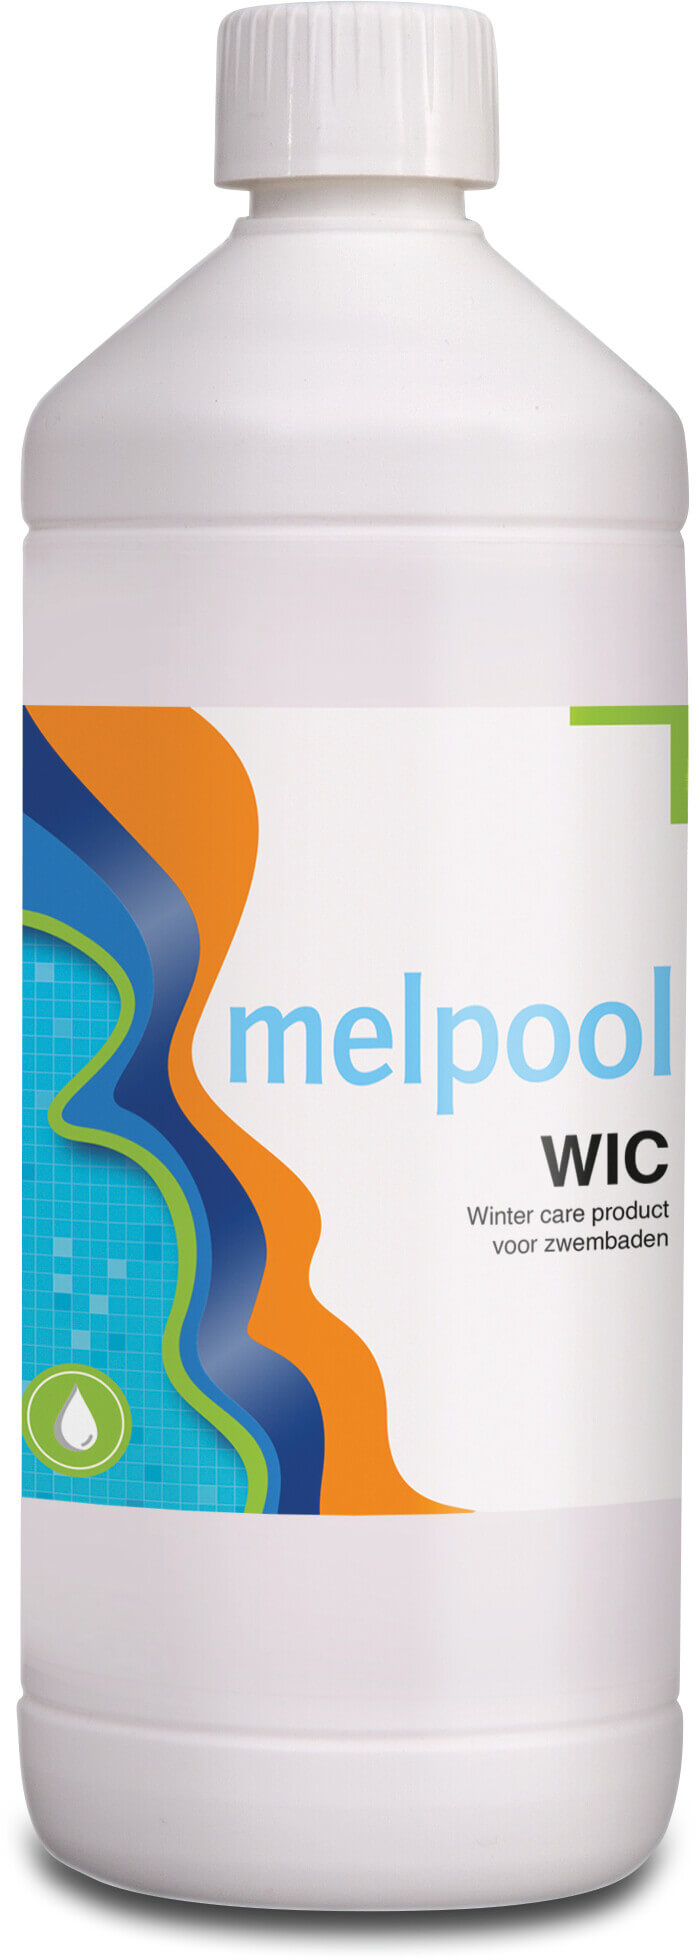 Melpool WIC swimming pool winter care product 1ltr